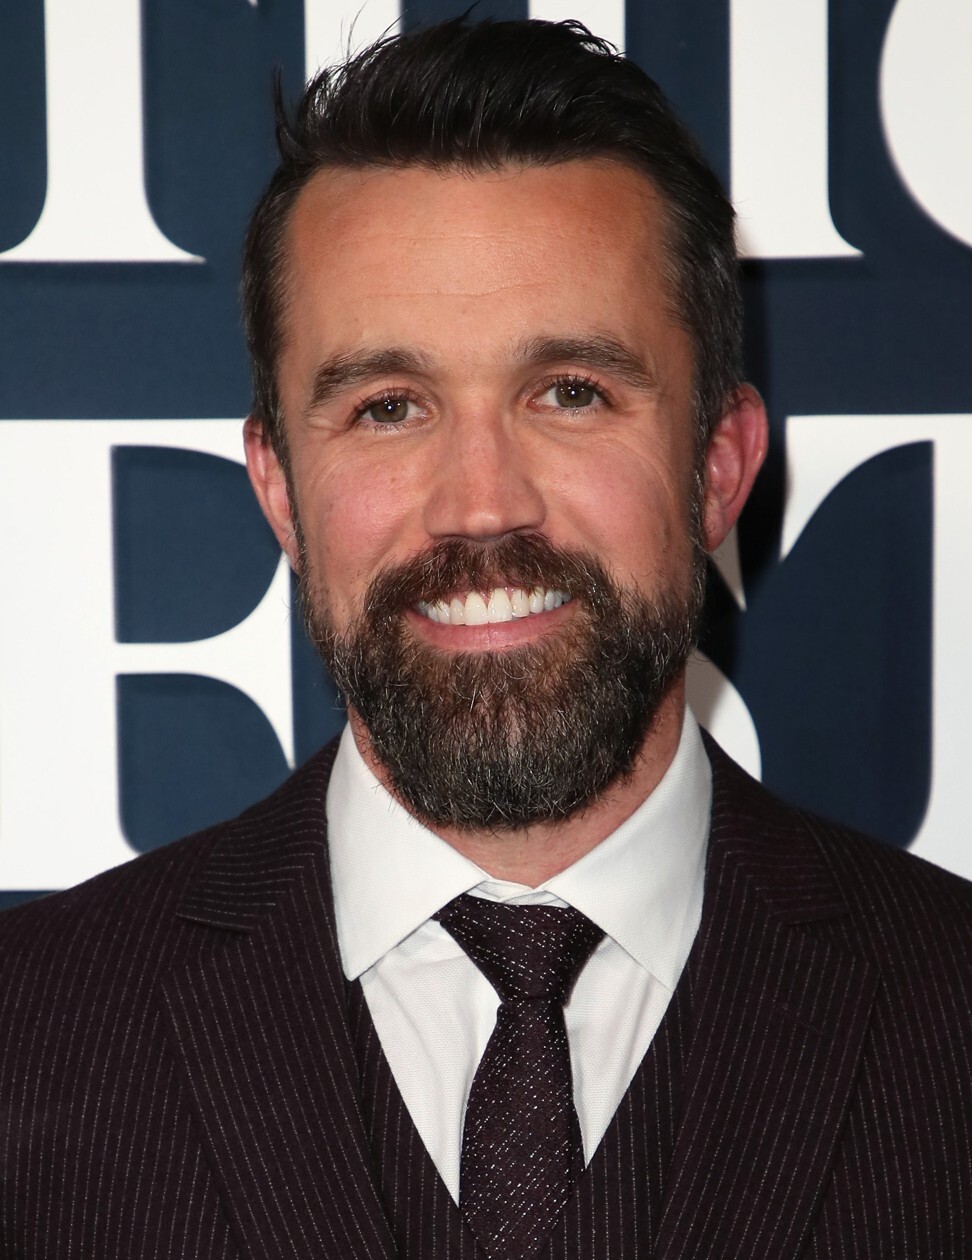 McElhenney attends the premiere of Apple TV+'s Mythic Quest: Raven's Banquet at the Cinerama Dome, Los Angeles, California. Photo: AFP